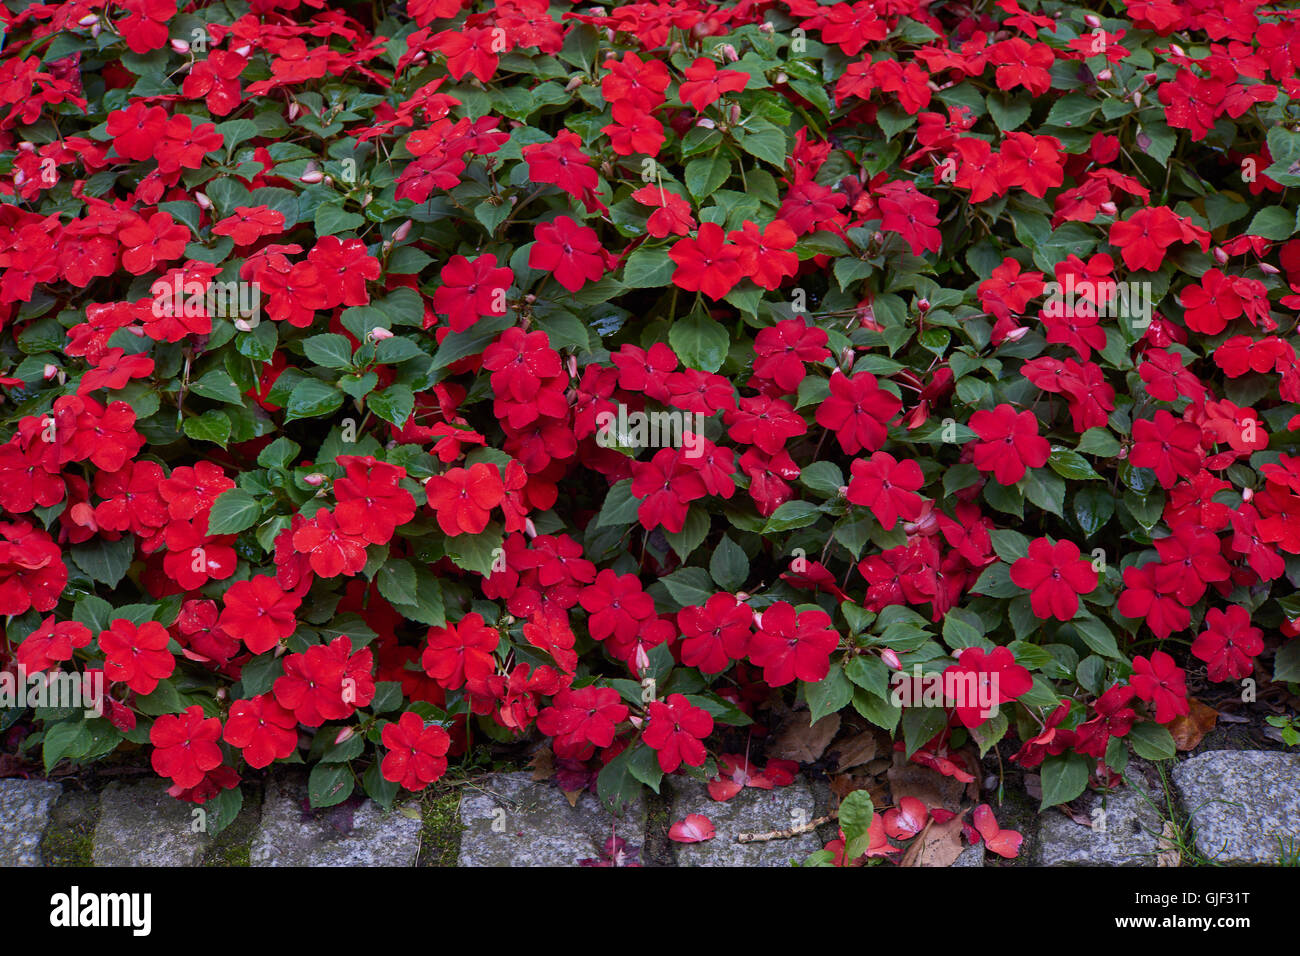 Impatiens Walleriana Lots Of Red Flowers On The Flower Bed Sultanii Stock Photo Alamy